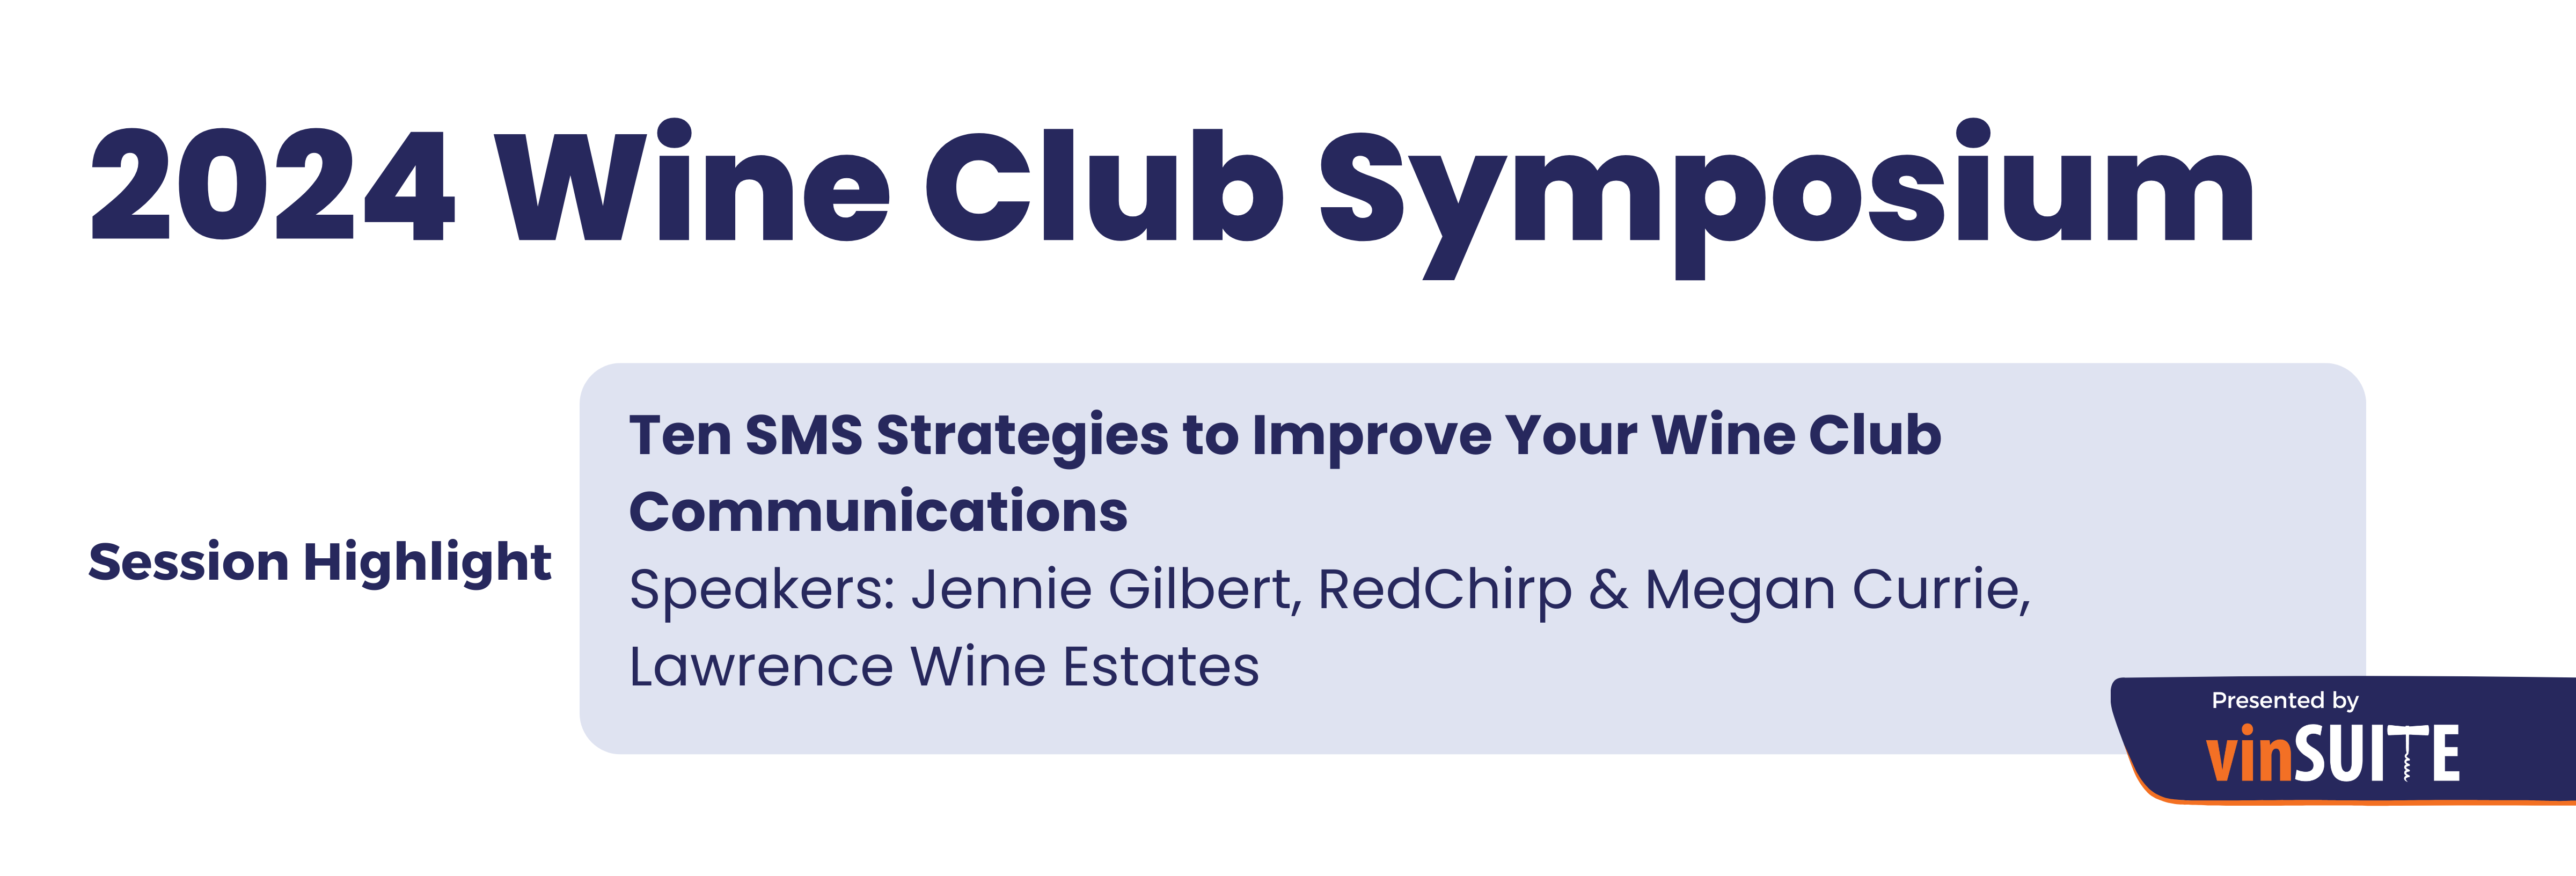 Wine Club Symposium - Session Highlight - Ten SMS Strategies to Improve Your WIne Club Communication